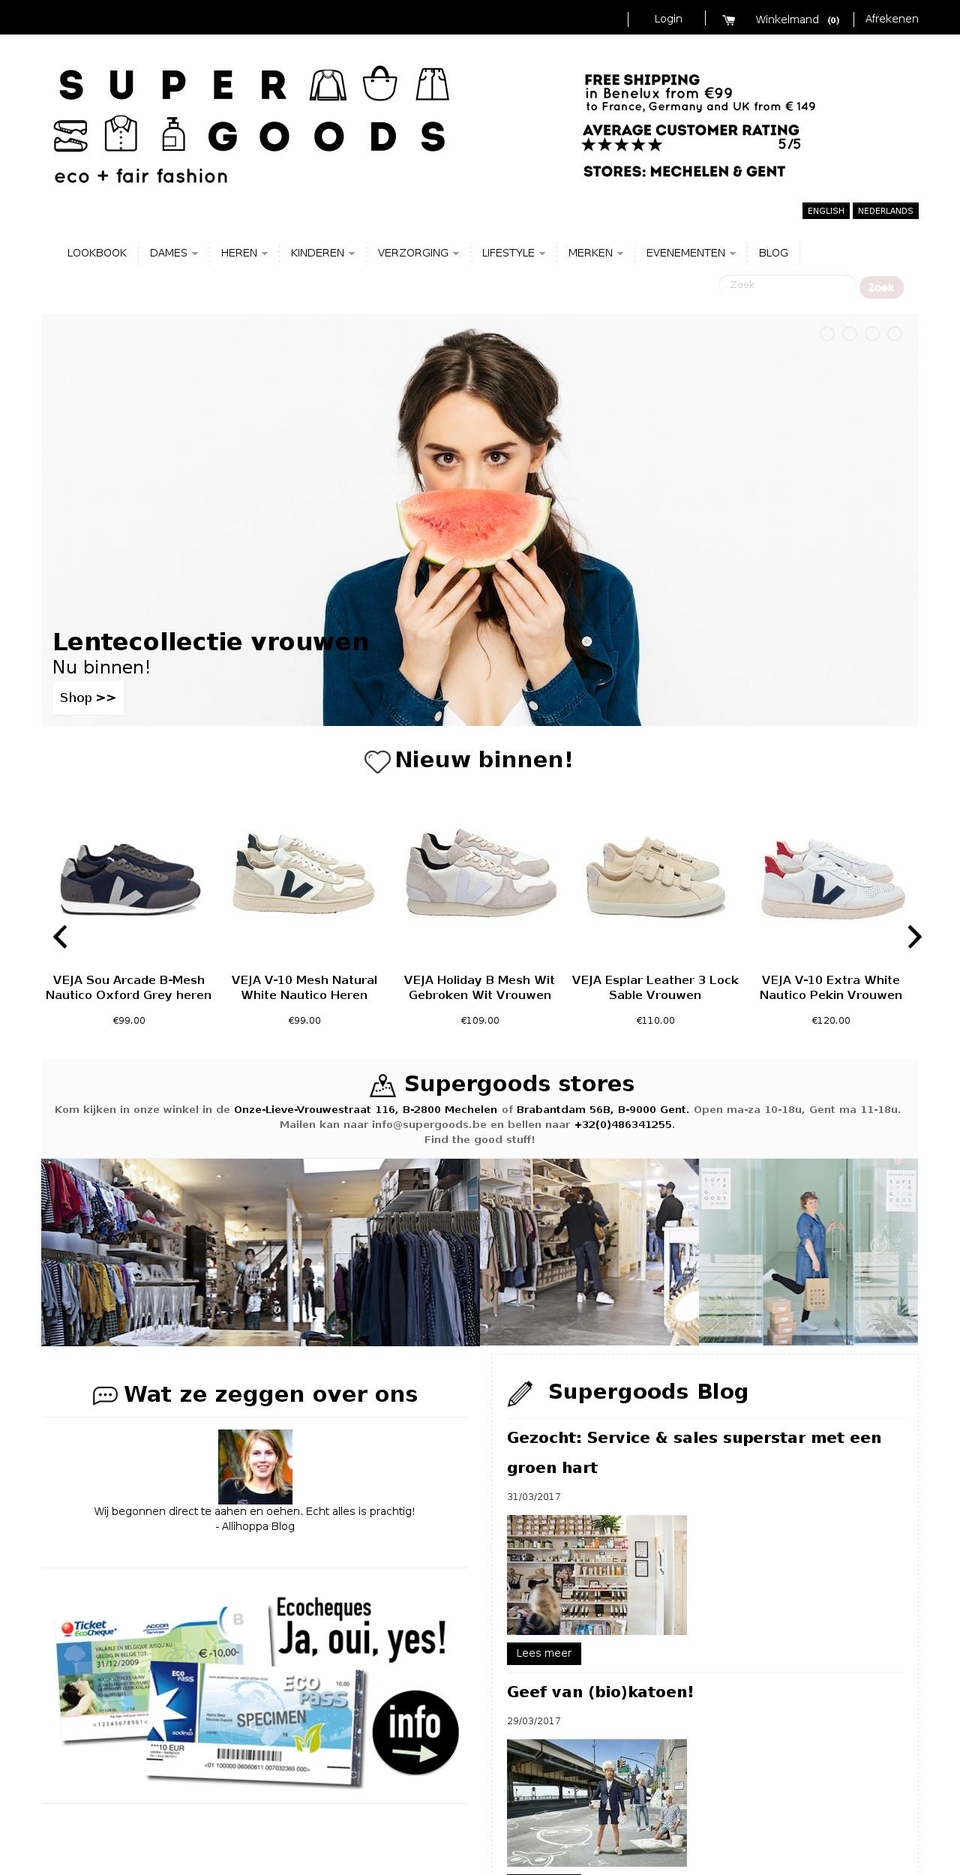 Ella Shopify theme site example supergoods.be